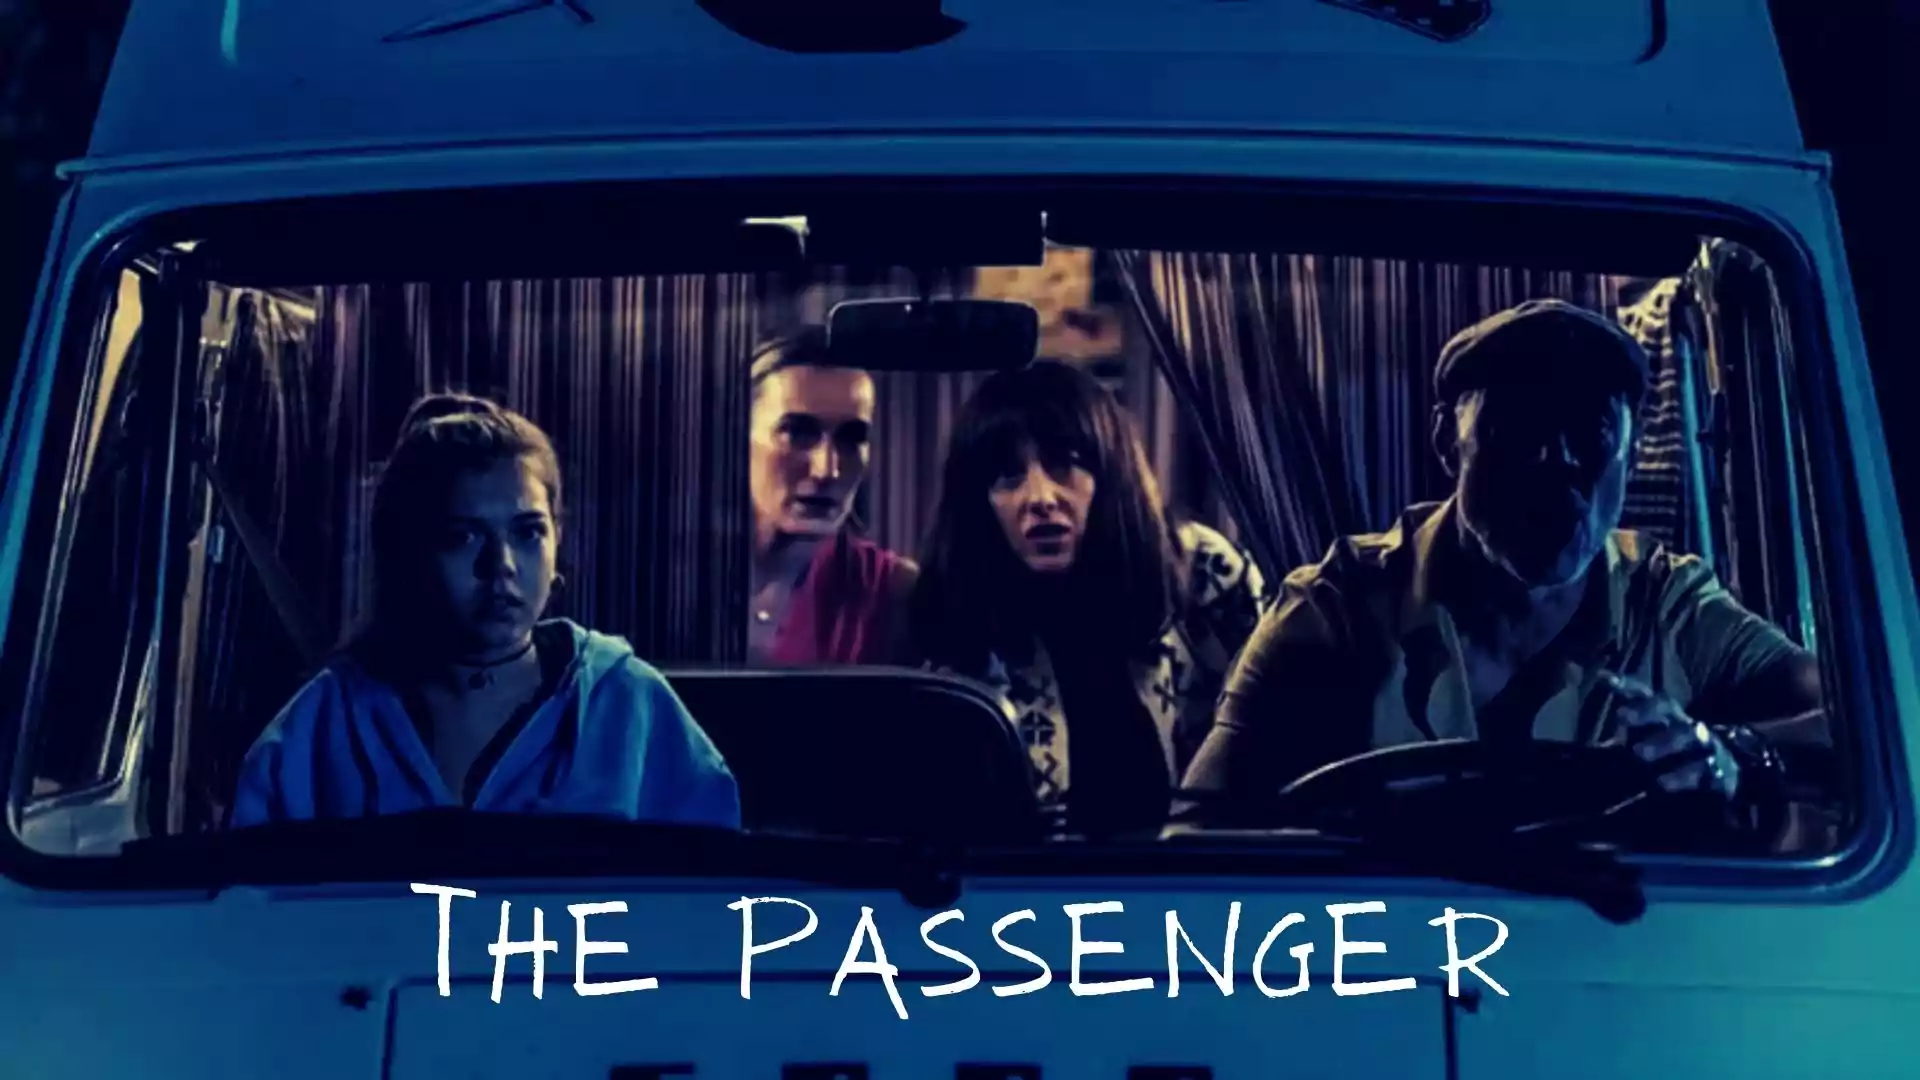 The Passenger Parents Guide | Age Rating (2021)